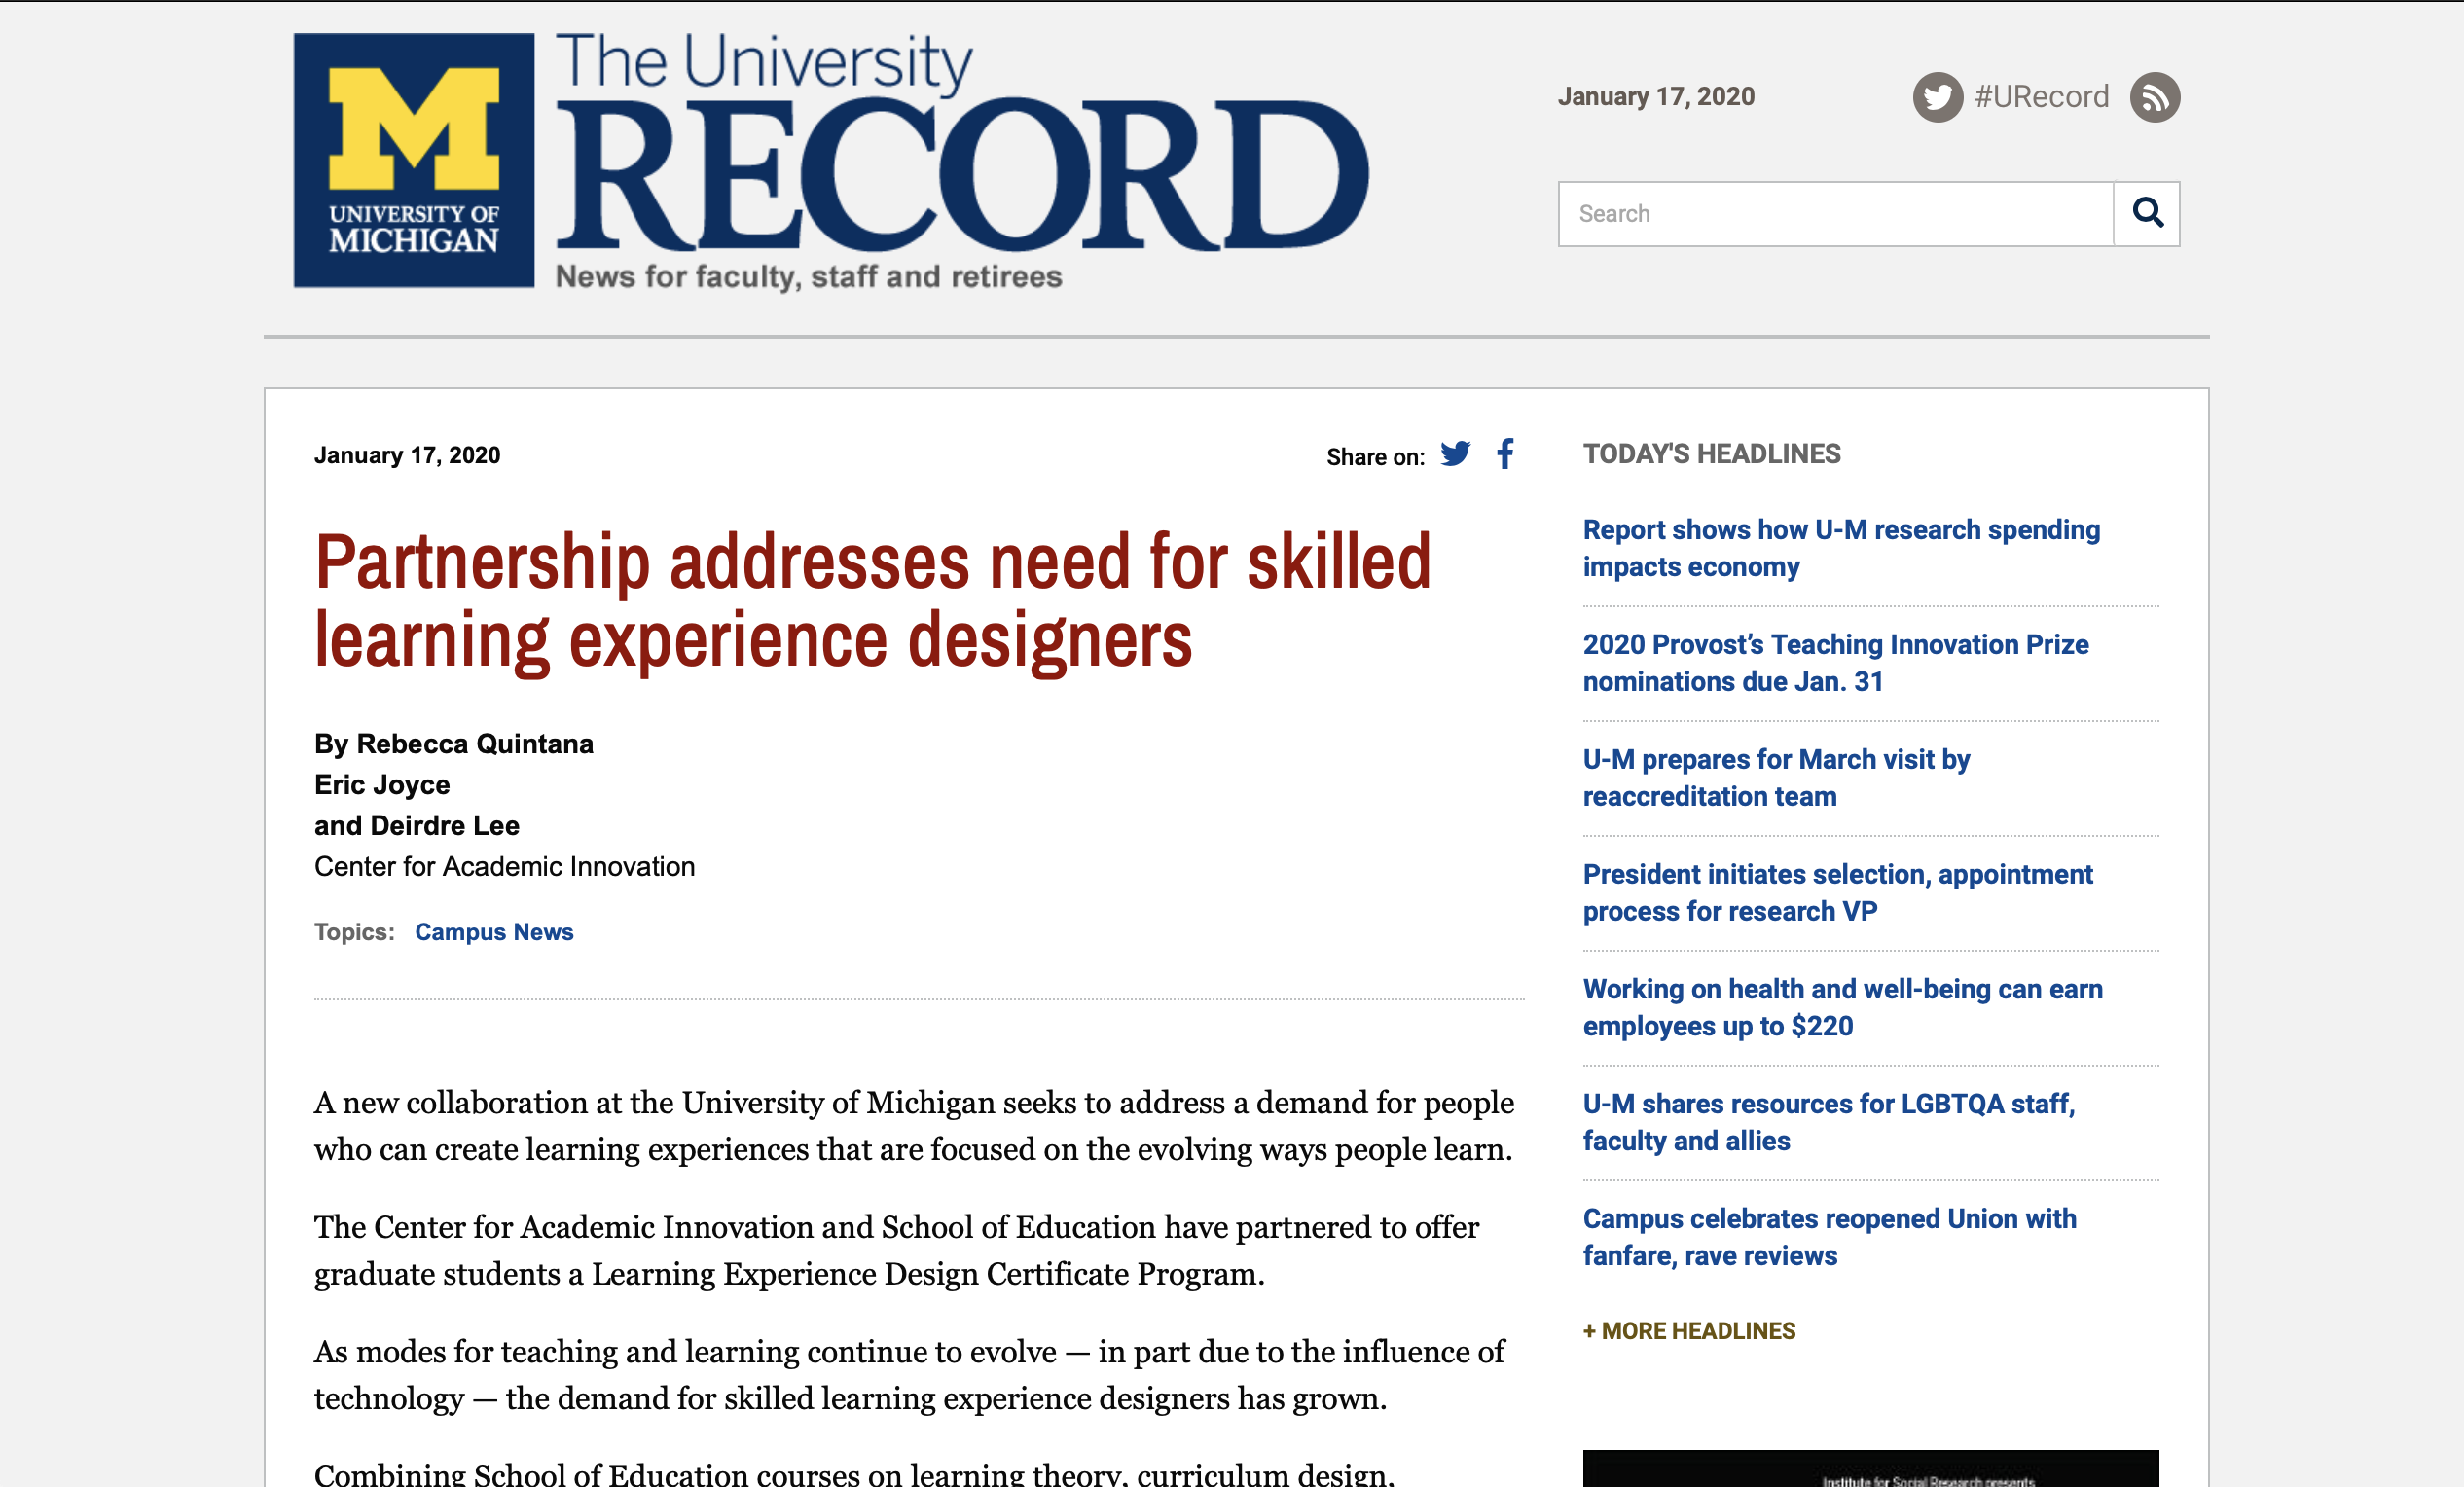 Partnership addresses need for skilled learning experience designers